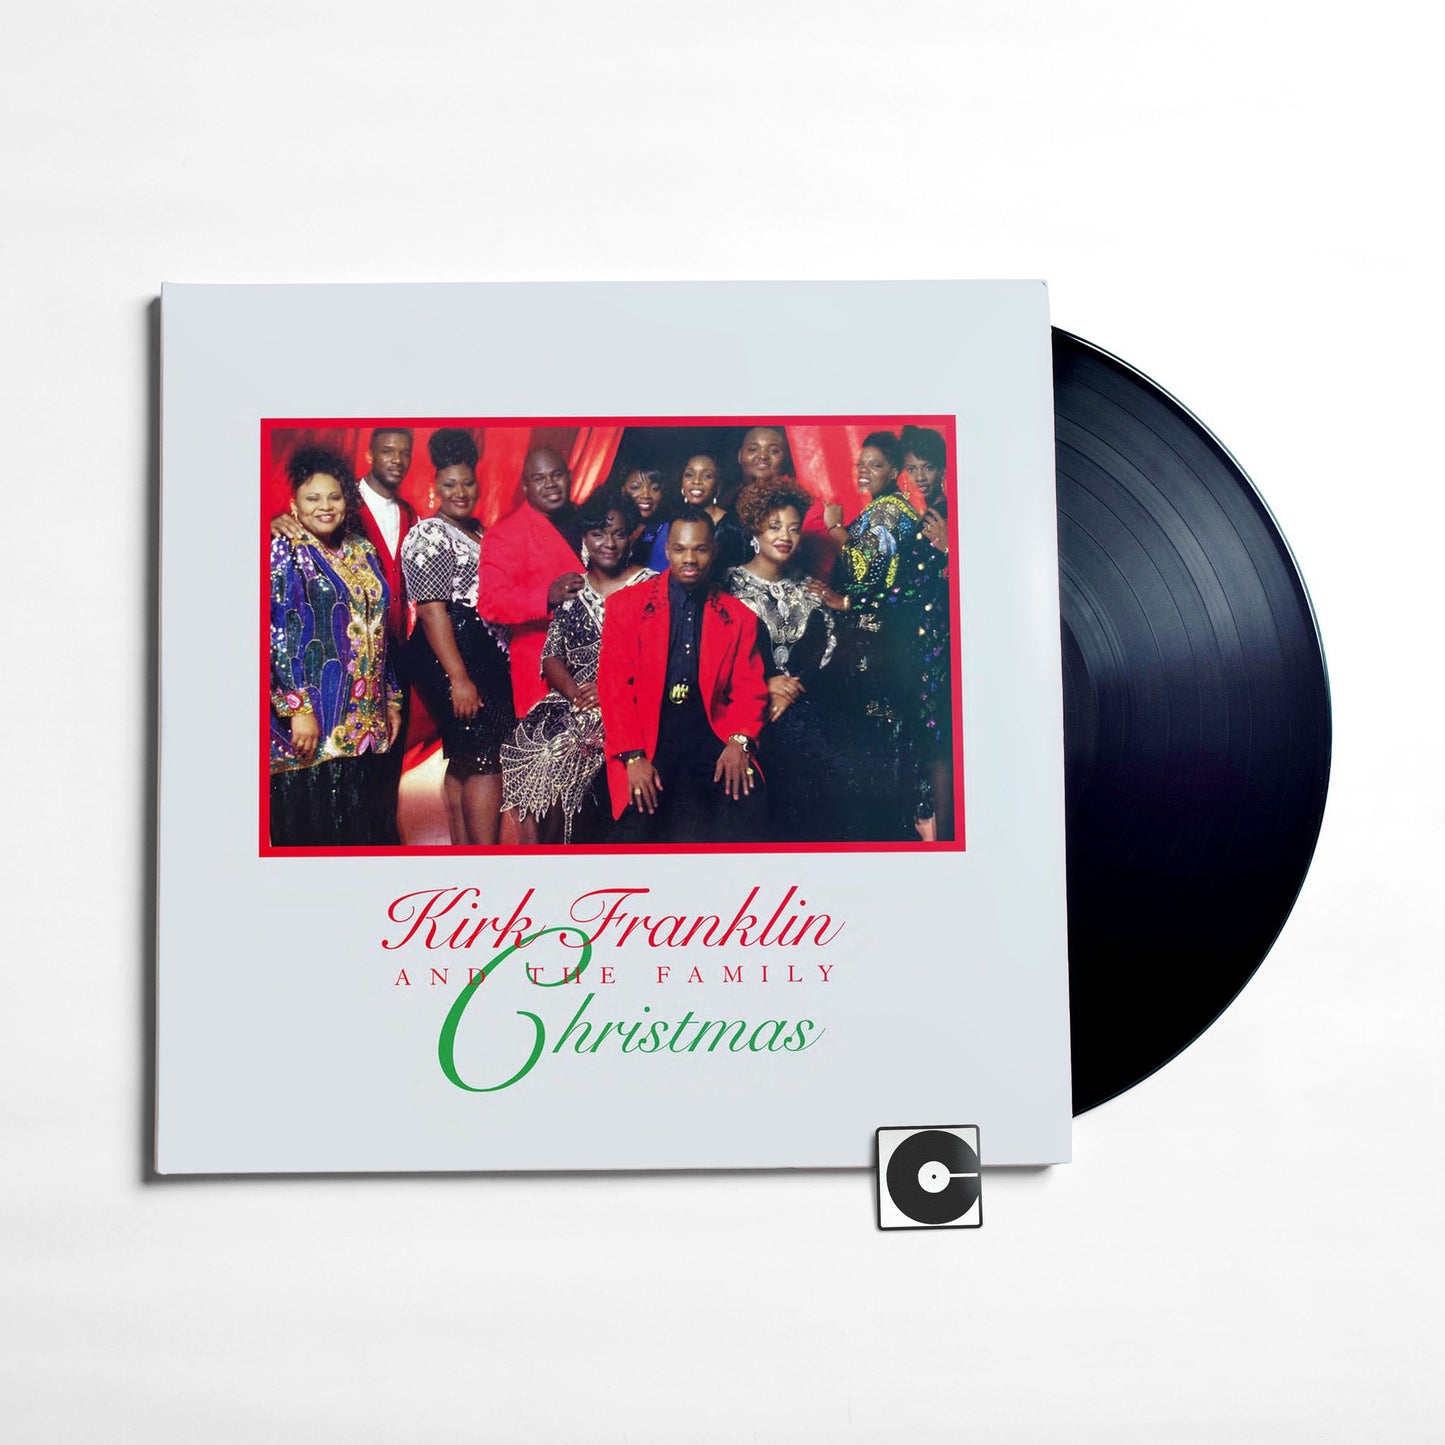 Kirk Franklin And The Family - "Kirk Franklin And The Family Christmas"